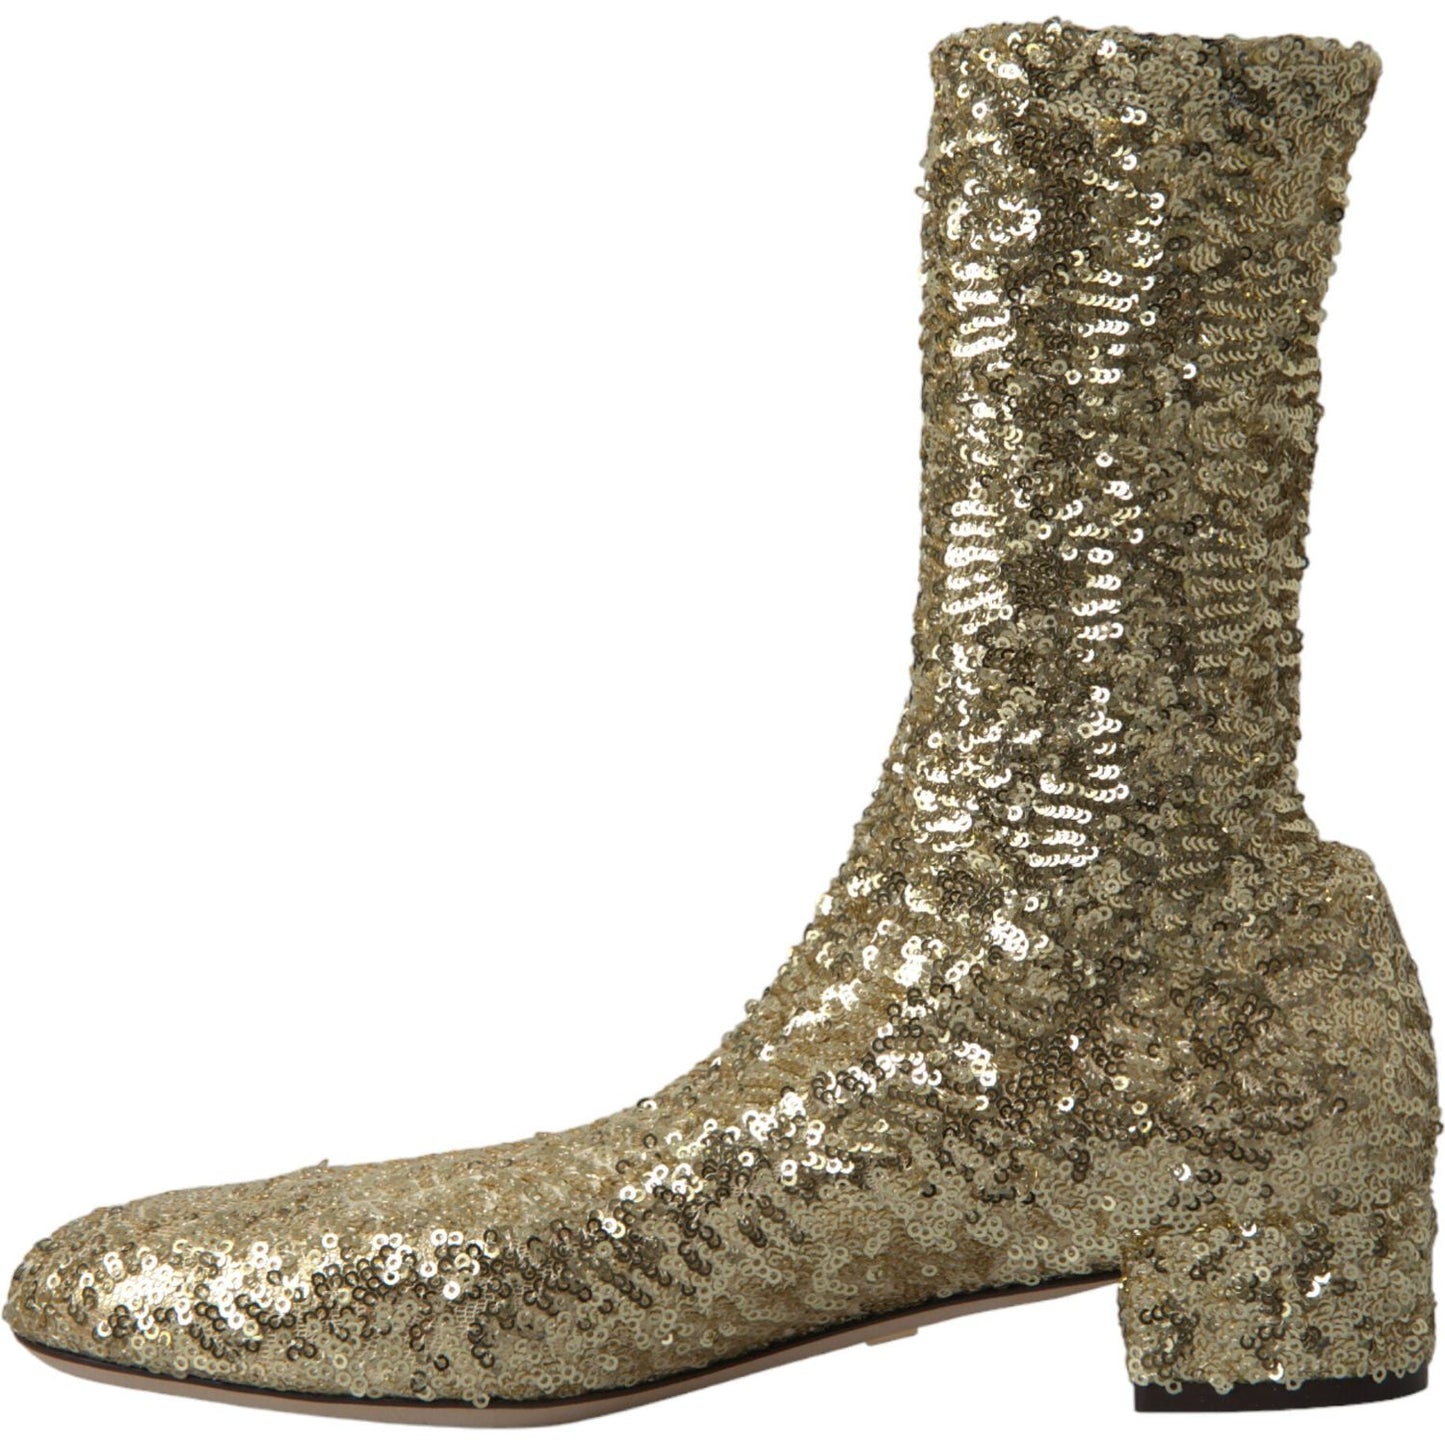 Dolce & Gabbana Elegant Mid Calf Gold Boots Exclusive Design gold-sequined-short-boots-stretch-shoes 465A9708-bg-scaled-80bd97bb-958.jpg